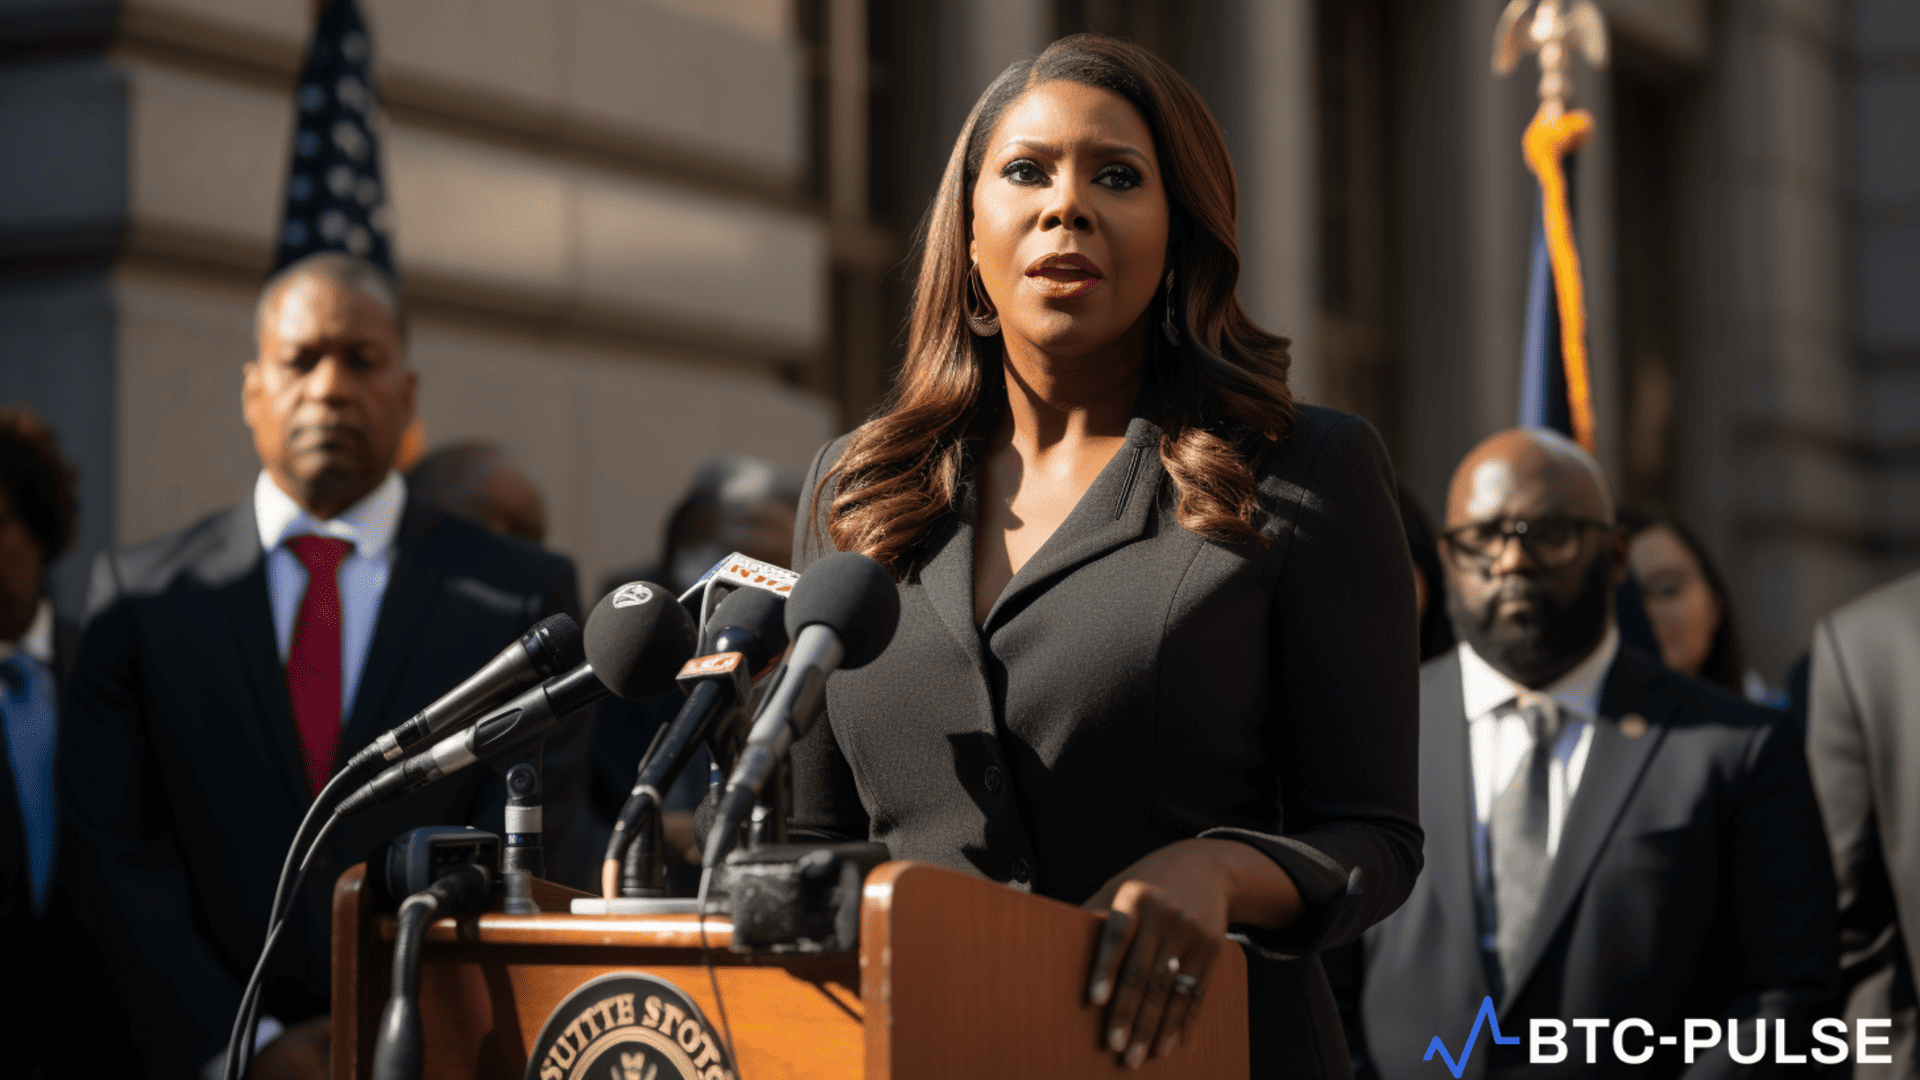 New York Attorney General Letitia James speaking at a press conference.